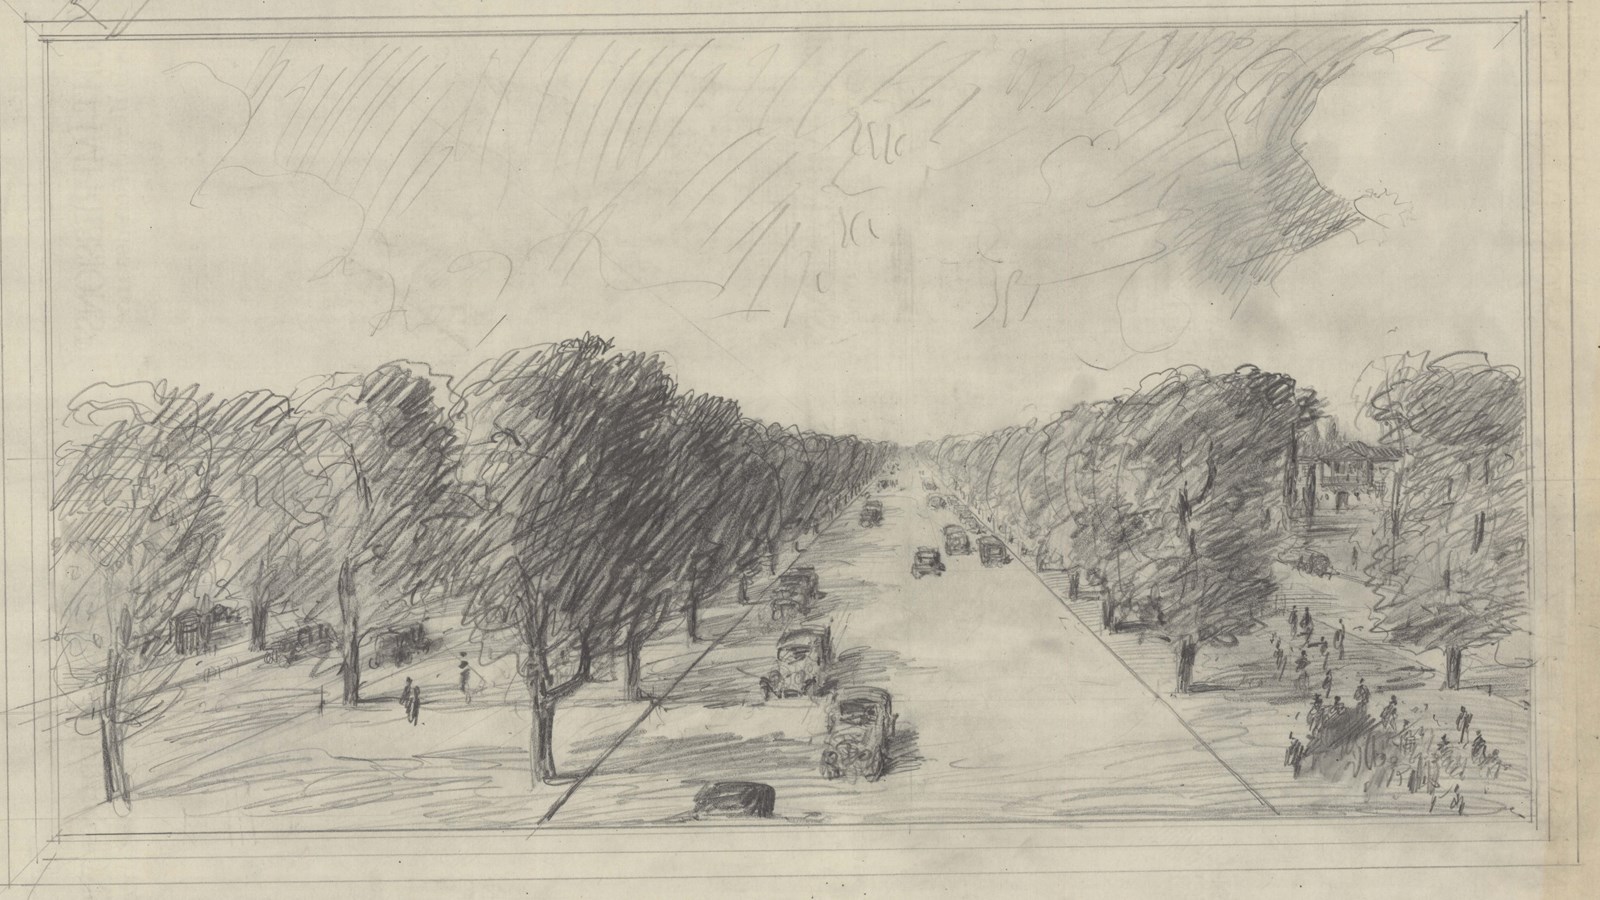 Pencil drawing of road with cars on it with grassy area on both sides with trees and people